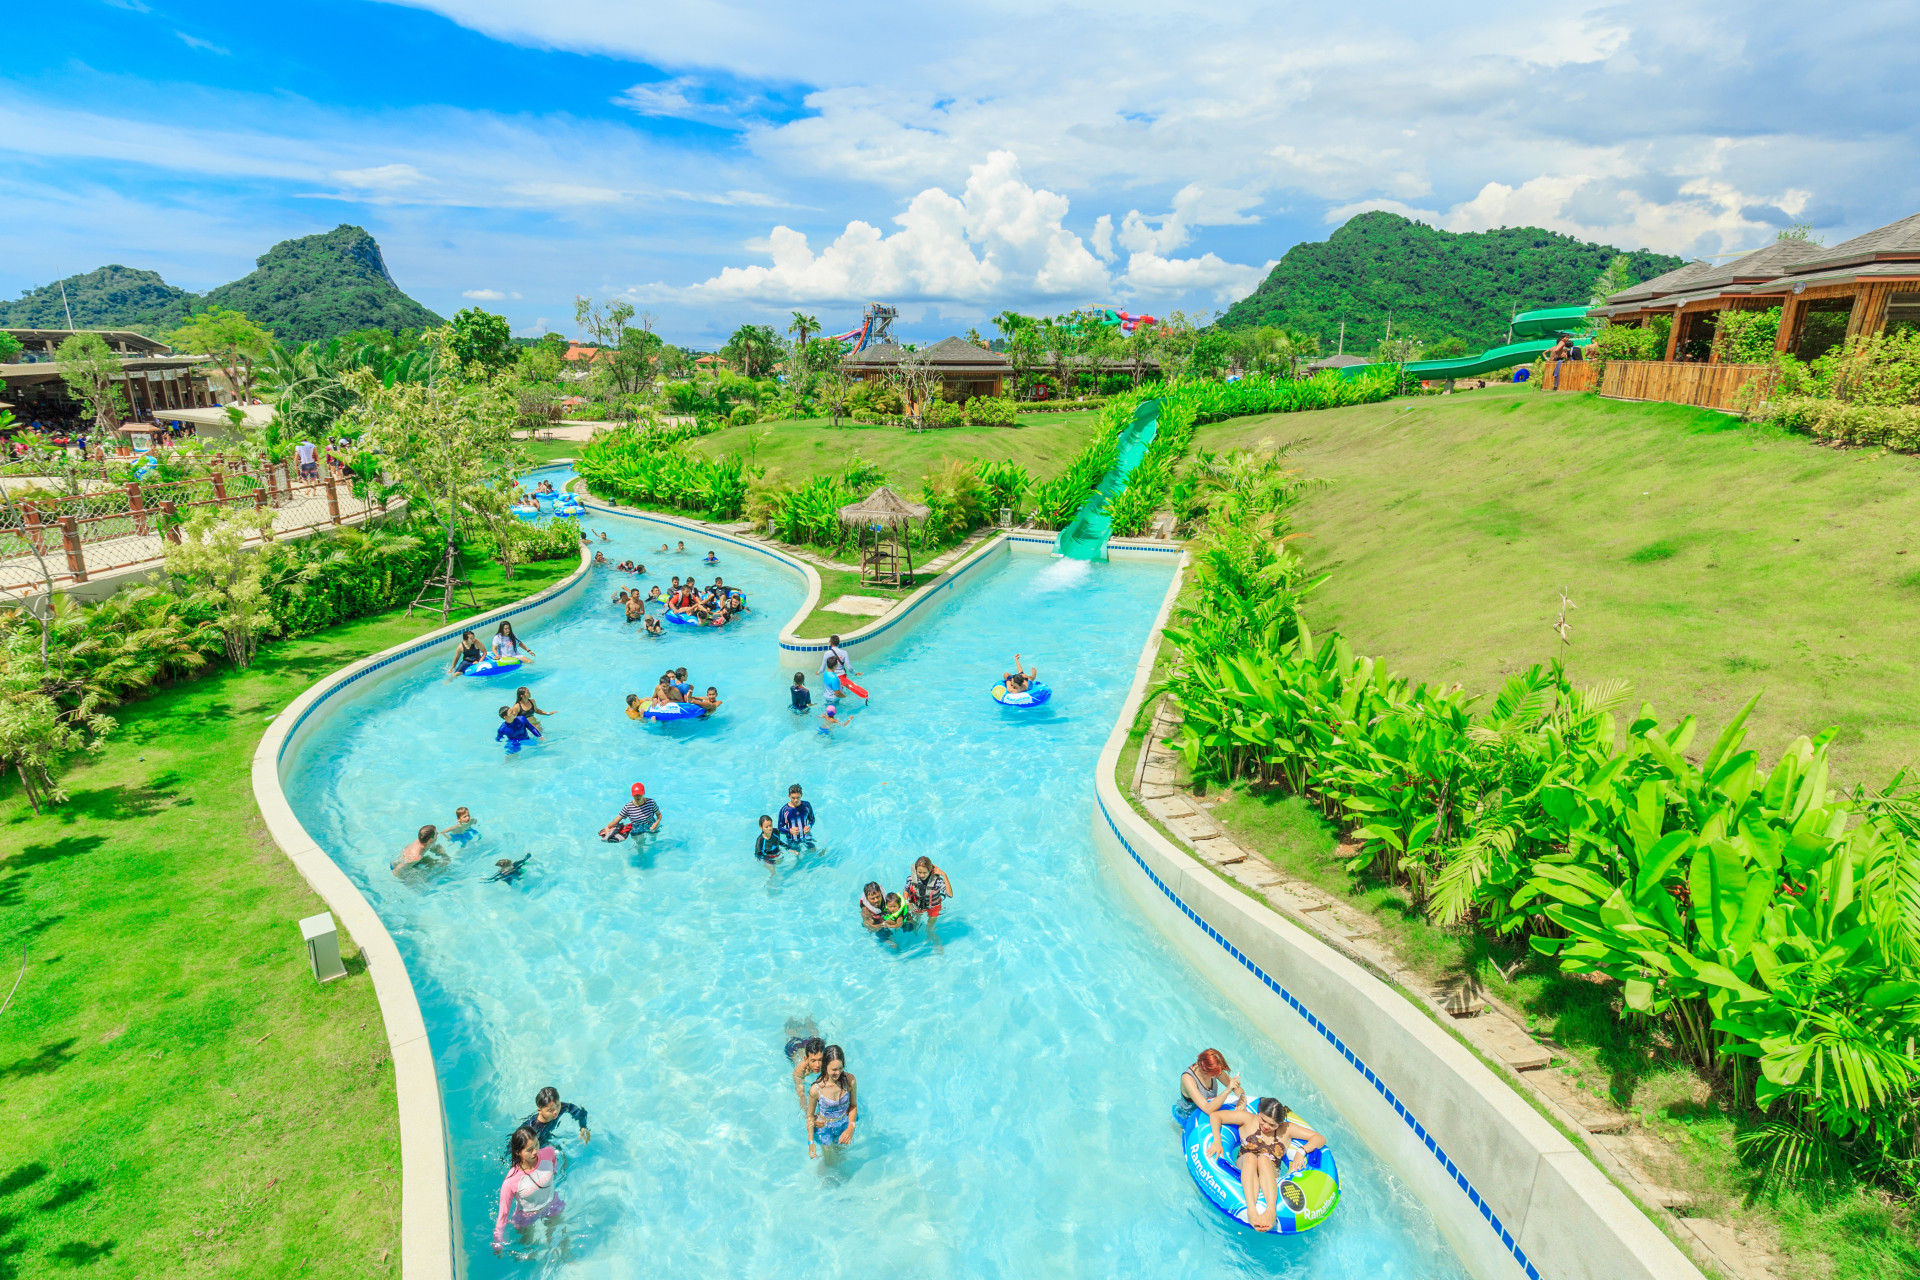 Located in Pattaya, Thailand, this is one of the biggest water parks in south east Asia. <p>You may also like:<a href="https://www.starsinsider.com/n/251231?utm_source=msn.com&utm_medium=display&utm_campaign=referral_description&utm_content=150139v2en-ae"> Can you guess the celebs in these pictures? </a></p>